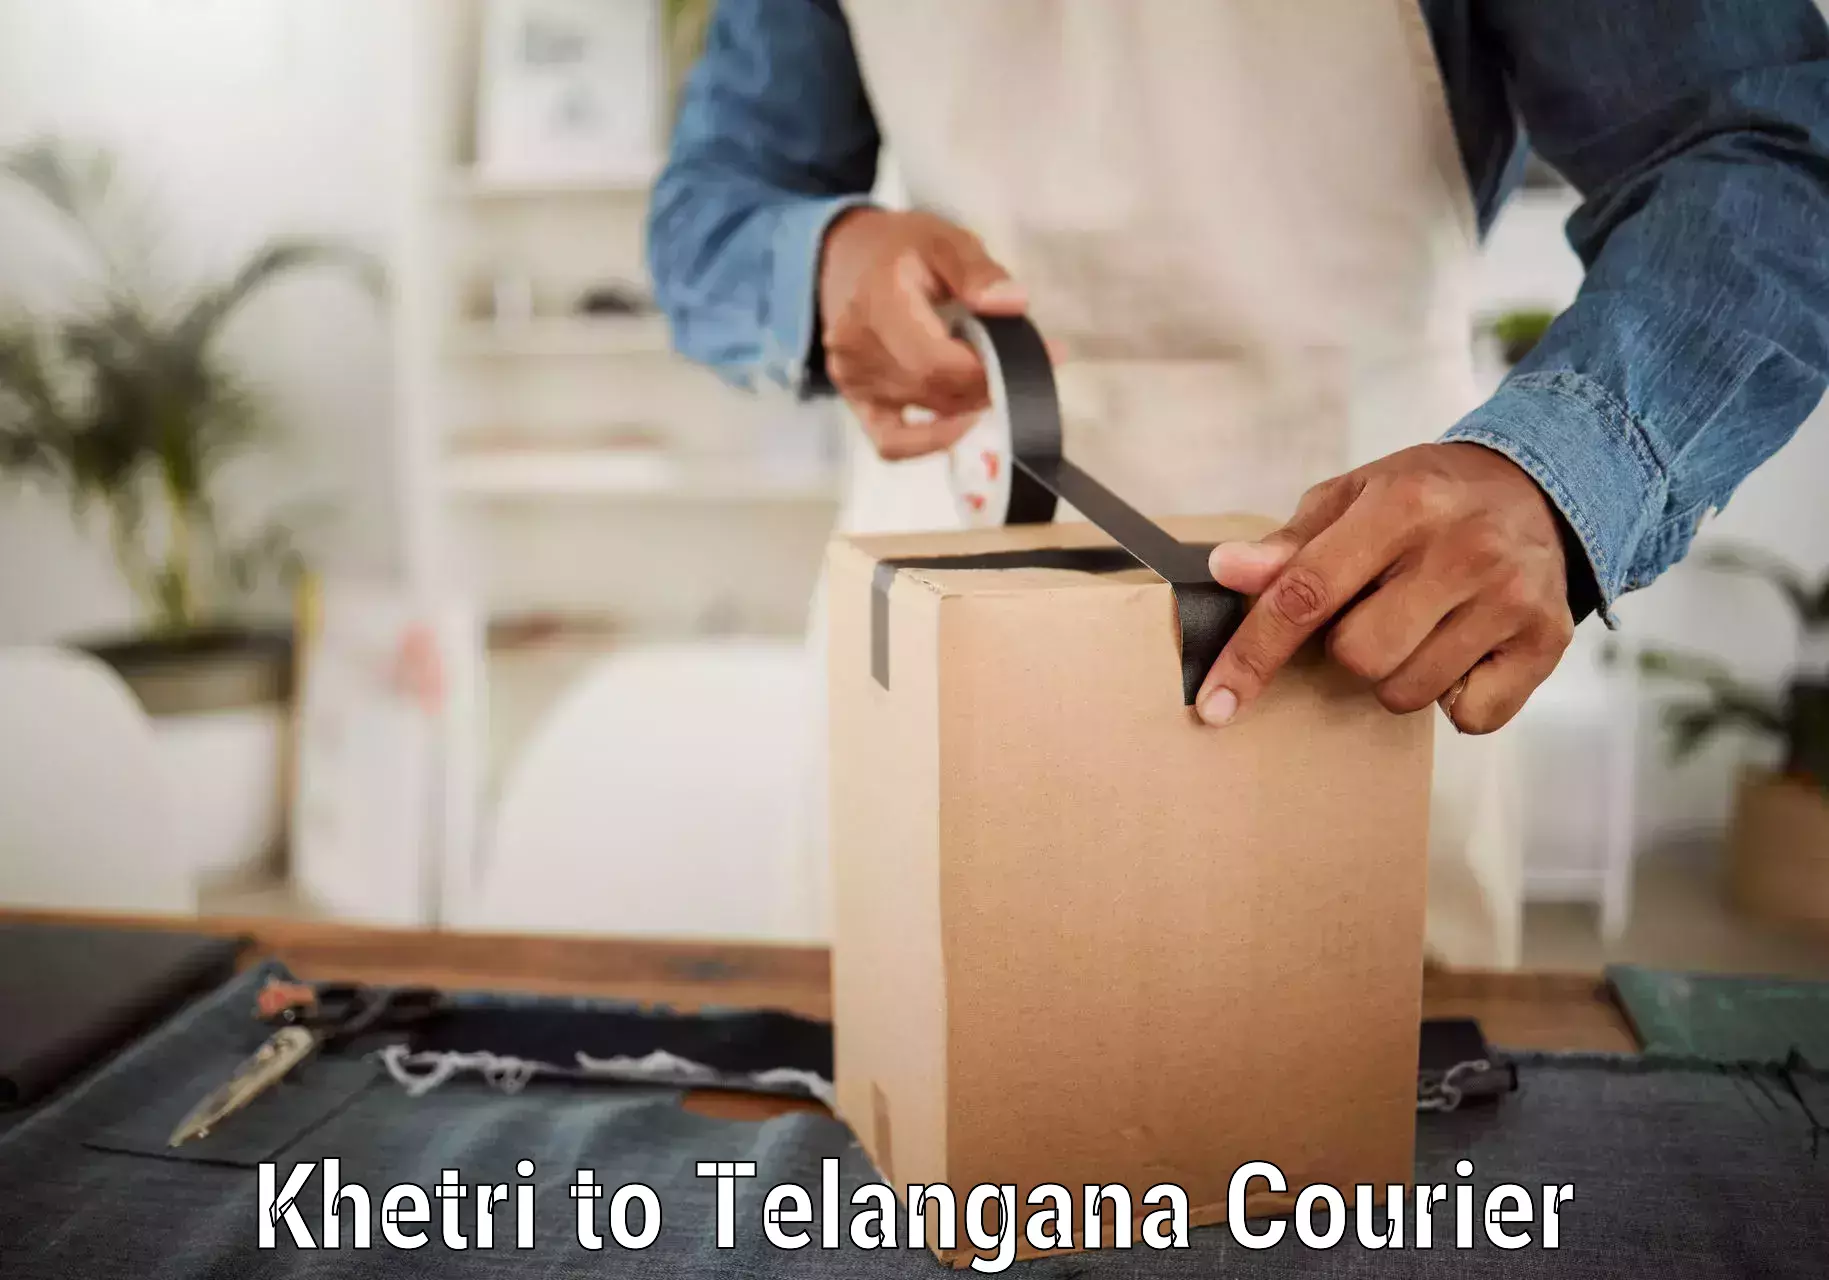 Parcel handling and care Khetri to Adilabad